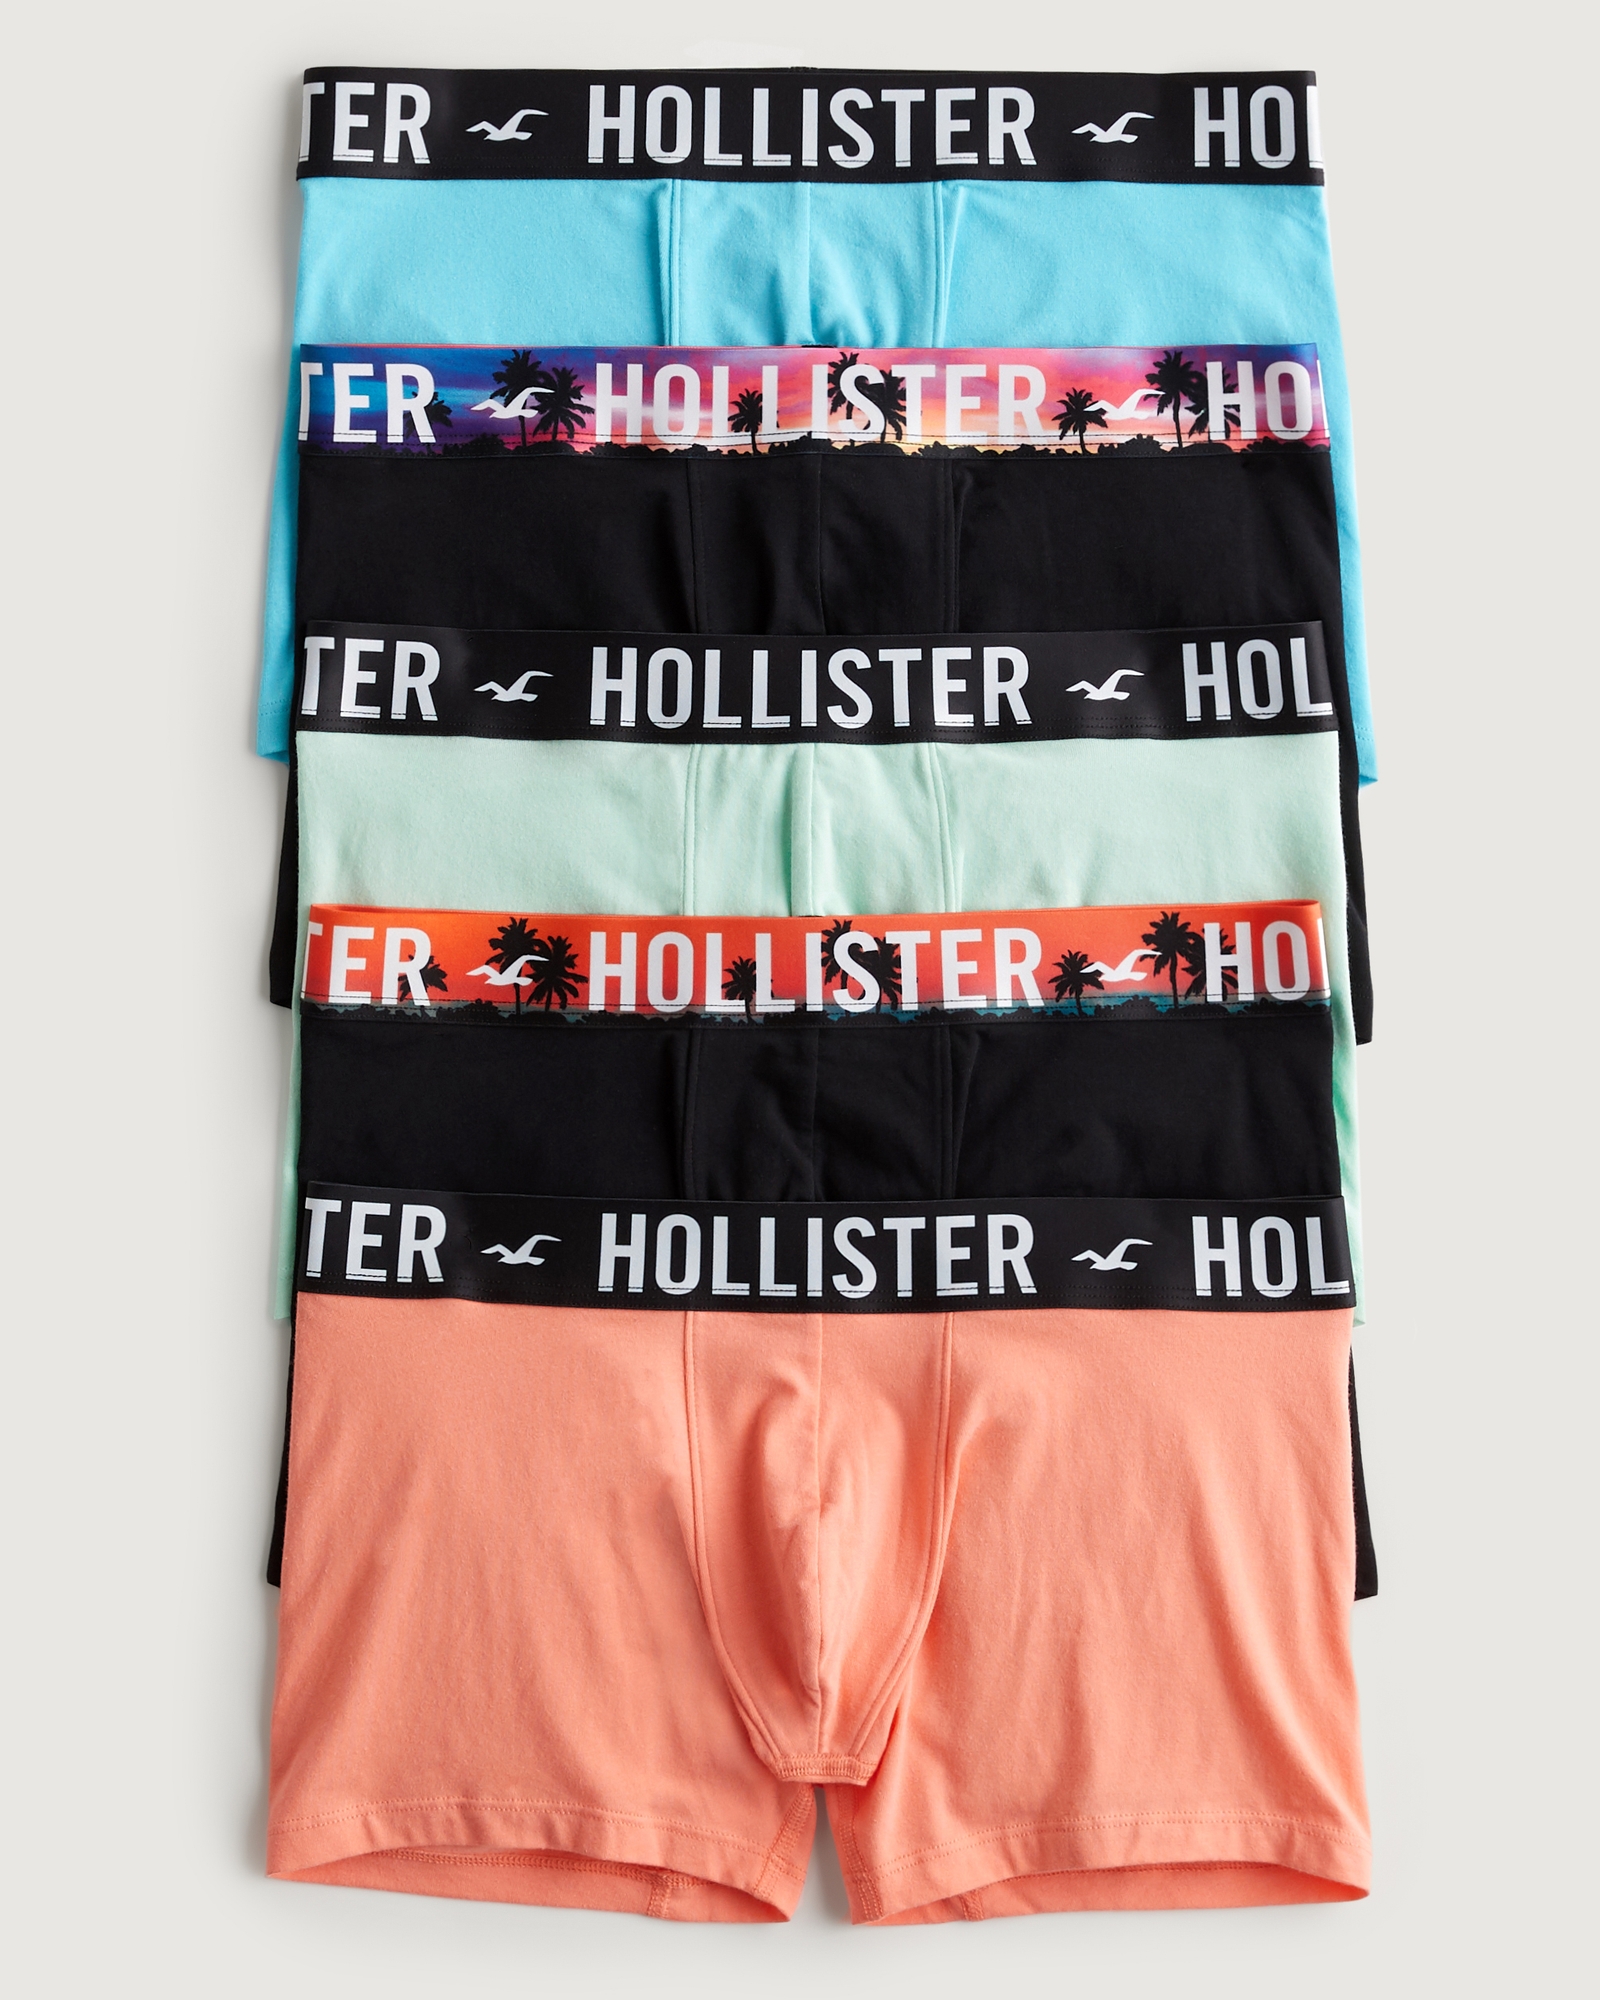 https://img.hollisterco.com/is/image/anf/KIC_314-3508-0883-210_prod1.jpg?policy=product-extra-large